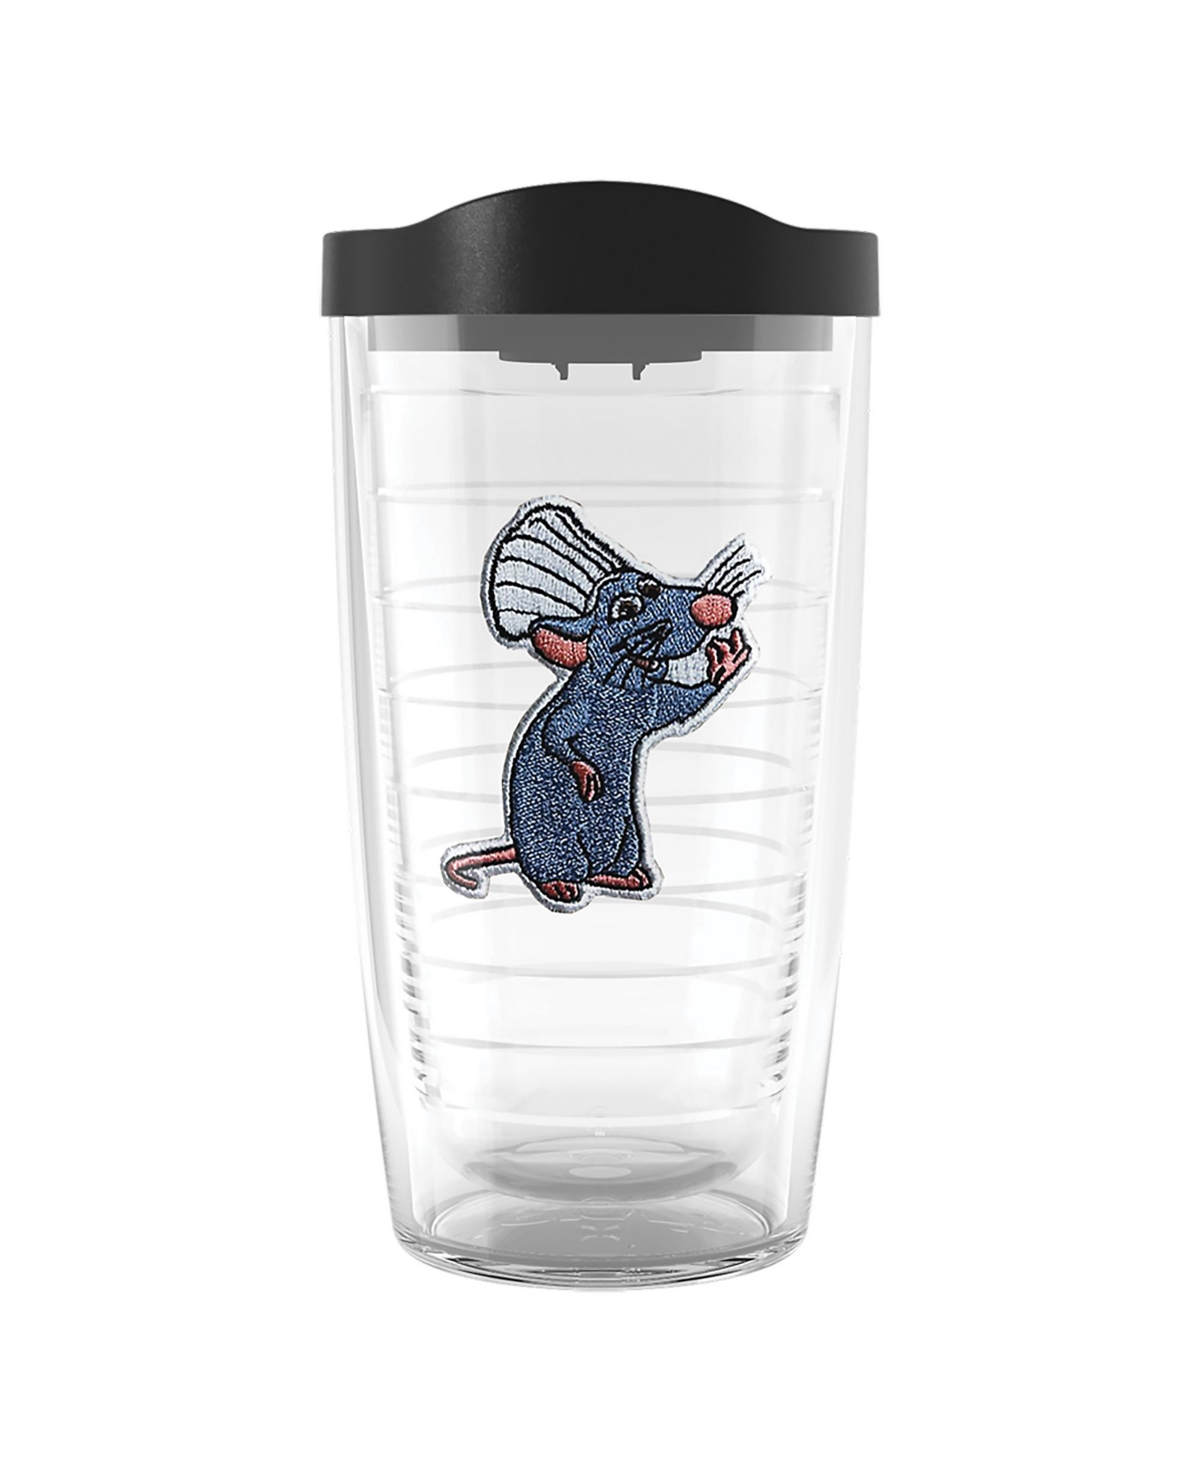 Tervis Tumbler Tervis Disney Pixar - Ratatouille Made In Usa Double Walled Insulated Tumbler Travel Cup Keeps Drink In Open Miscellaneous